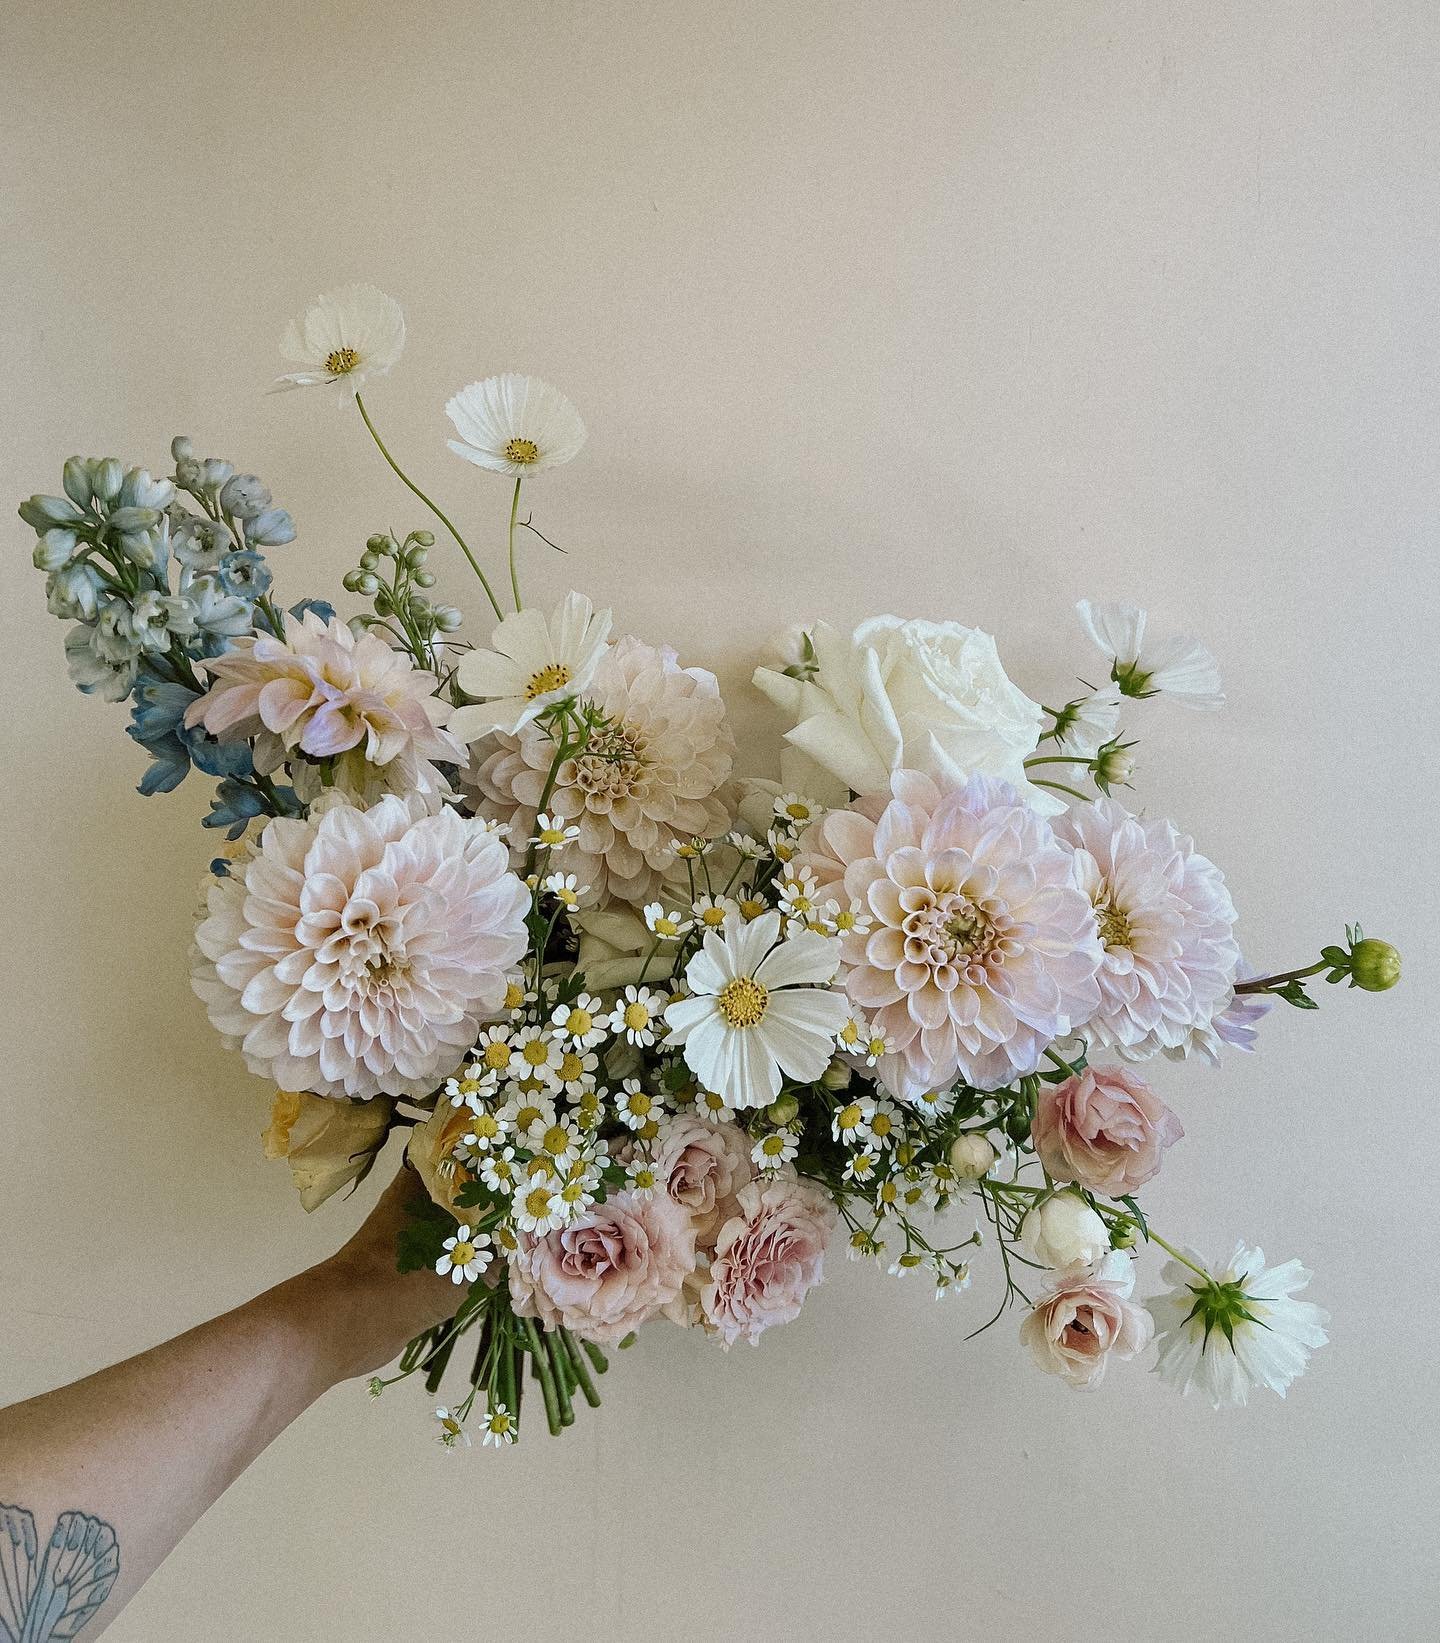 Bouquet of your dreams?? Cosmos and dahlias for life!